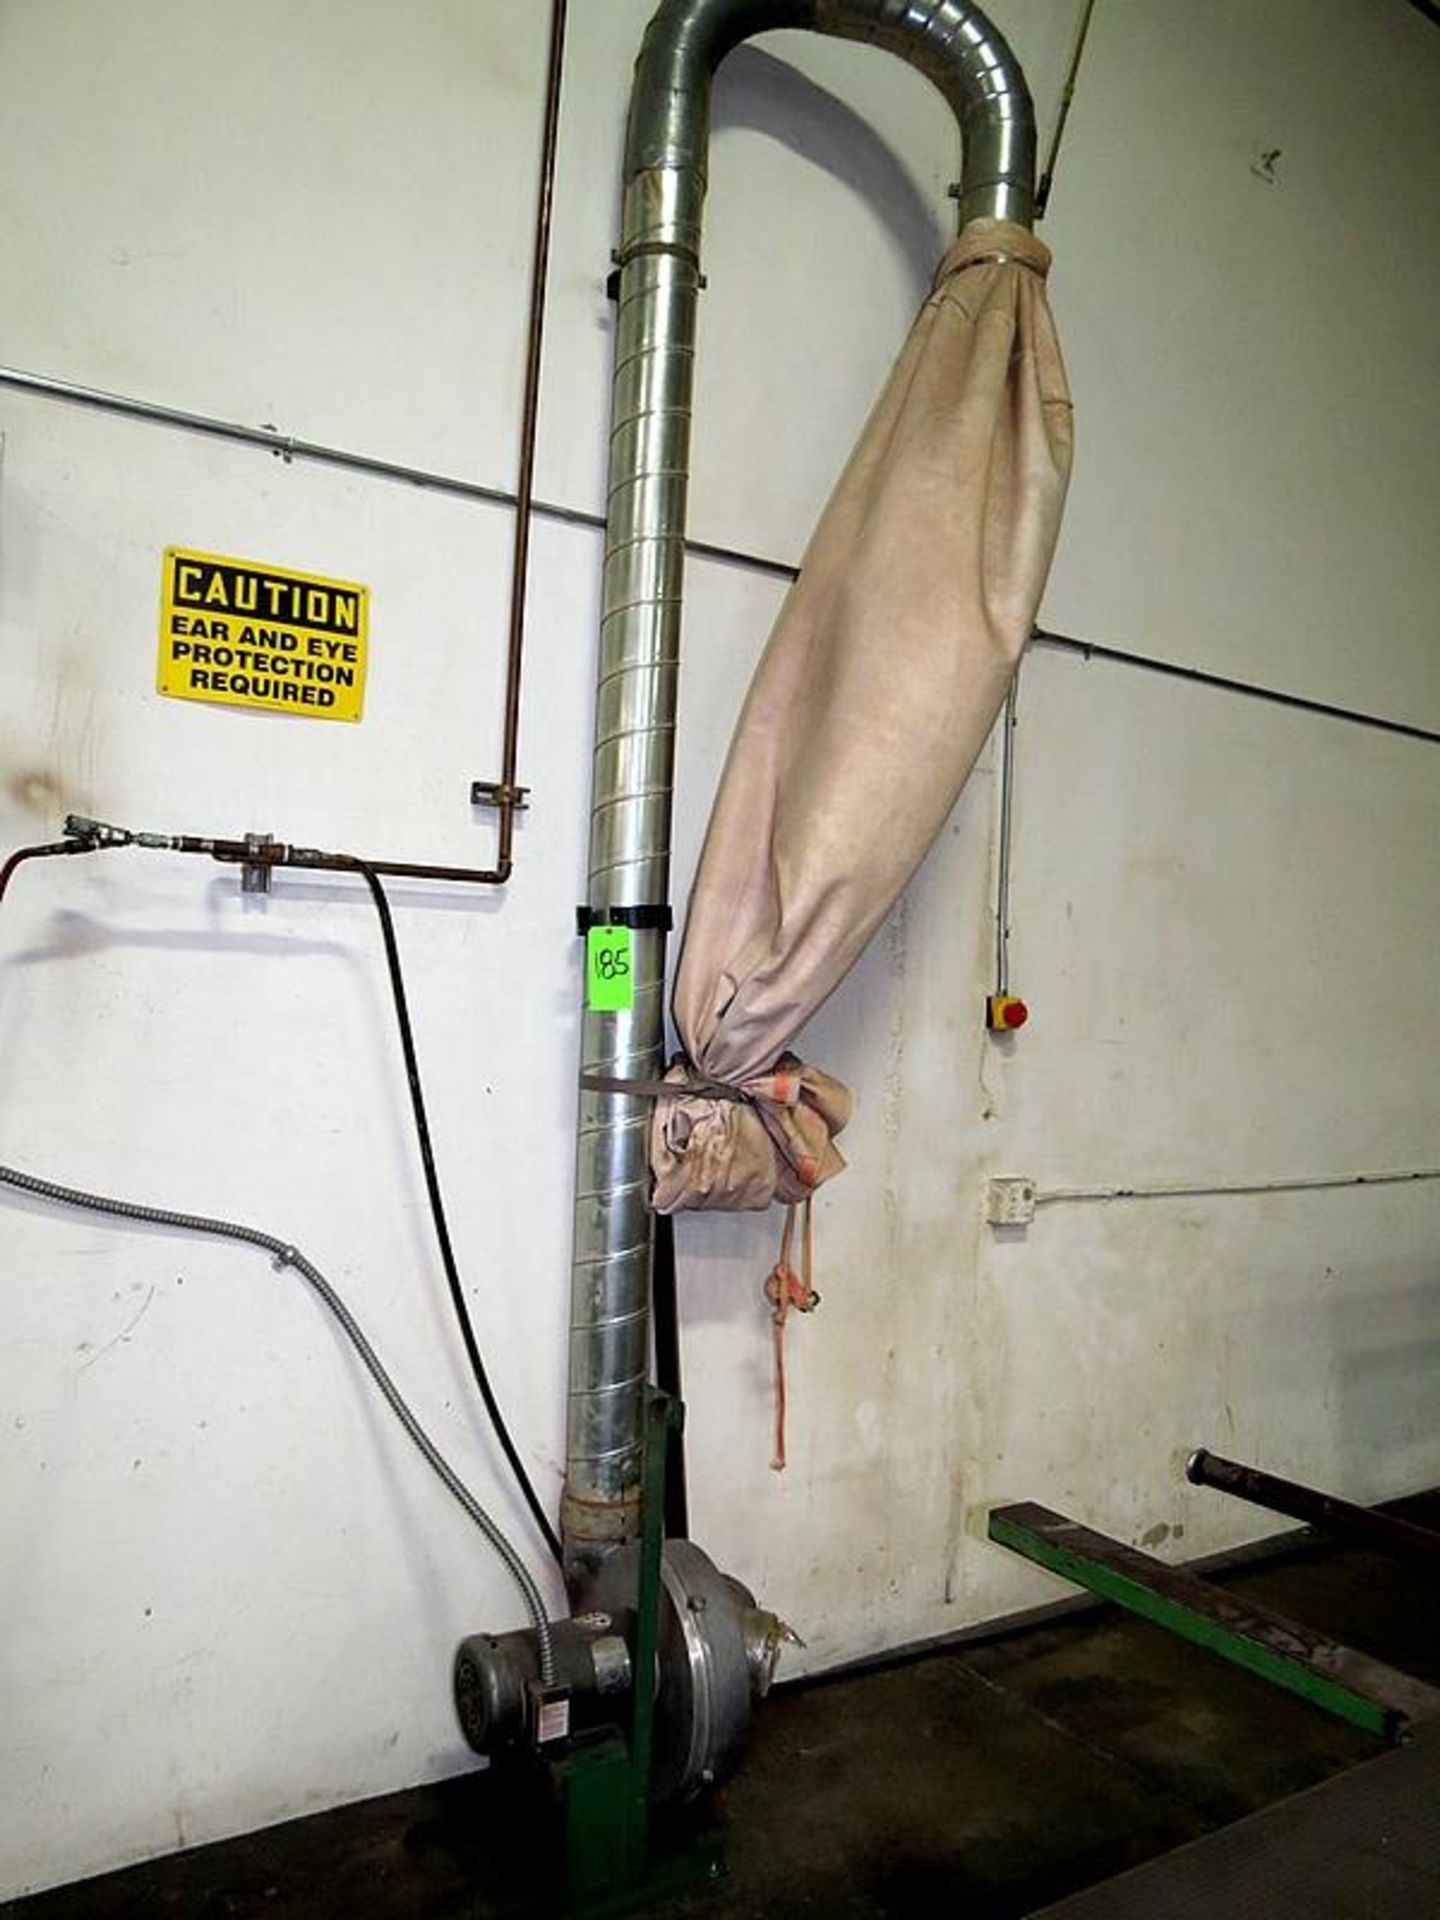 DUST COLLECTOR BAG AND BLOWER ONLY ON WALL